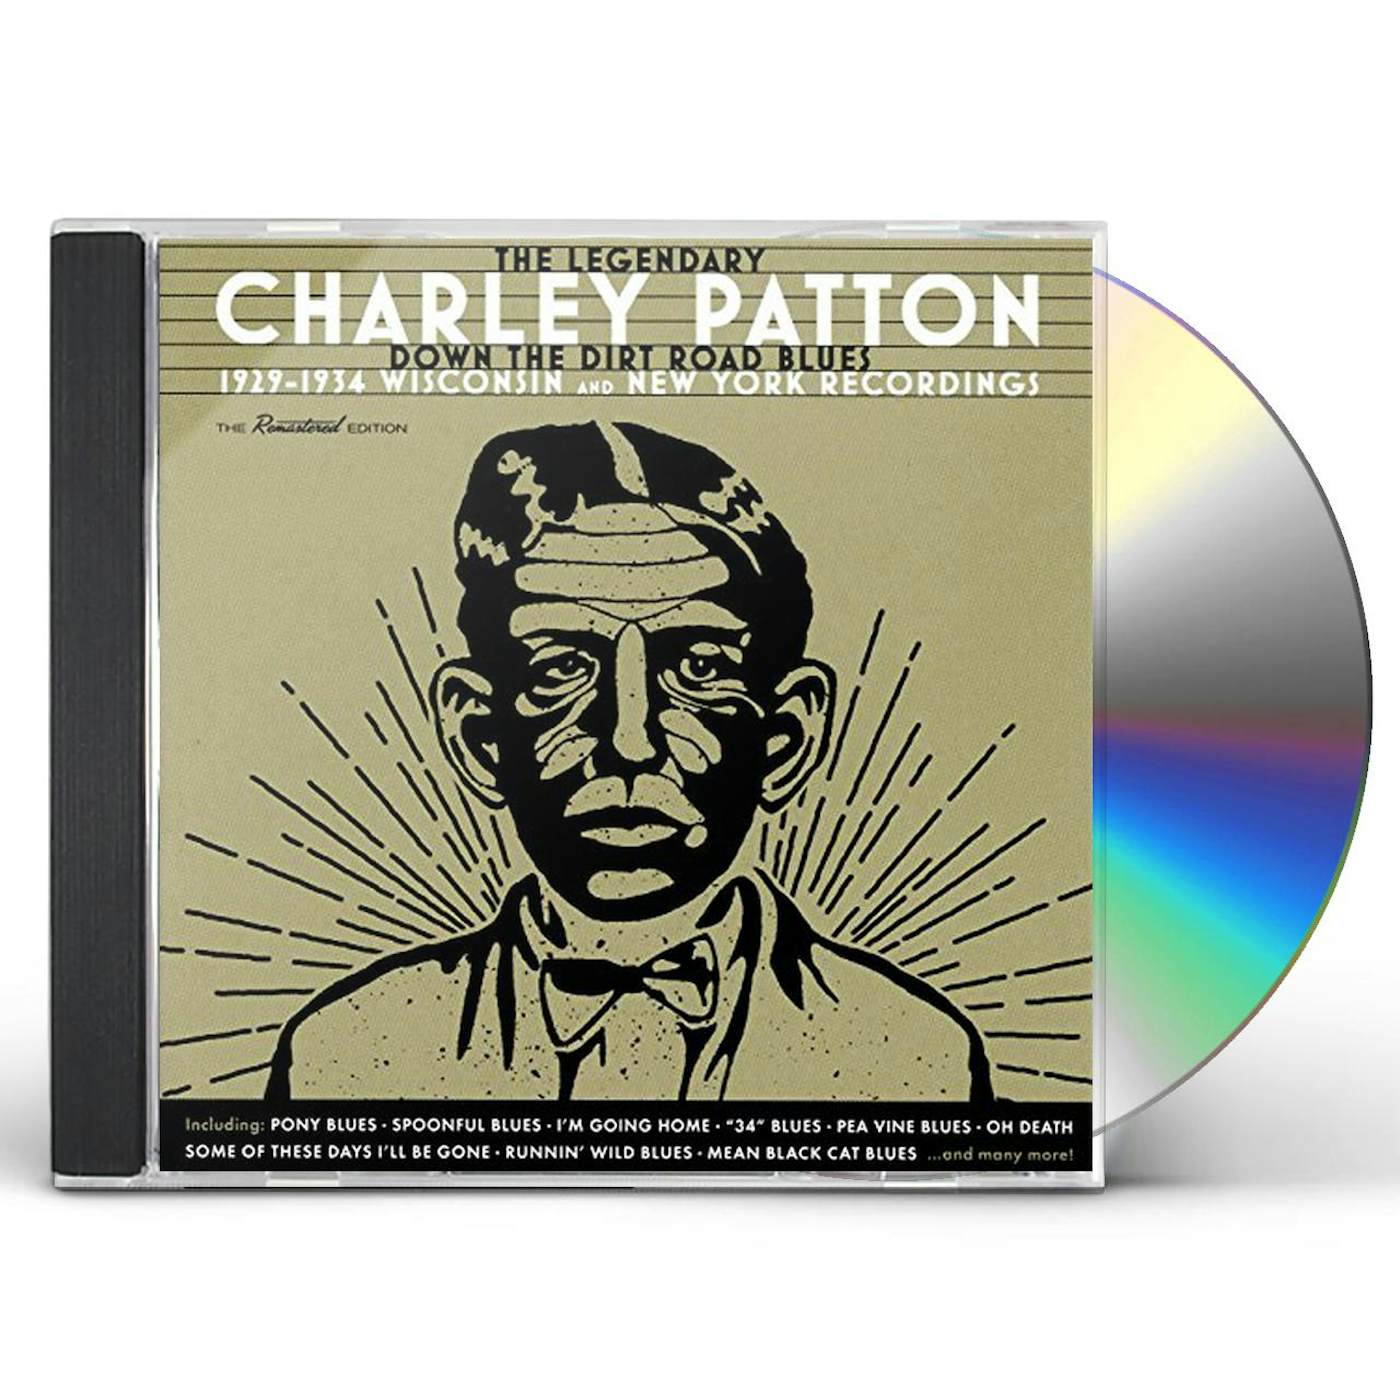 Charley Patton DOWN THE DIRT ROAD BLUES: 1929-1934 WISCONSIN & CD